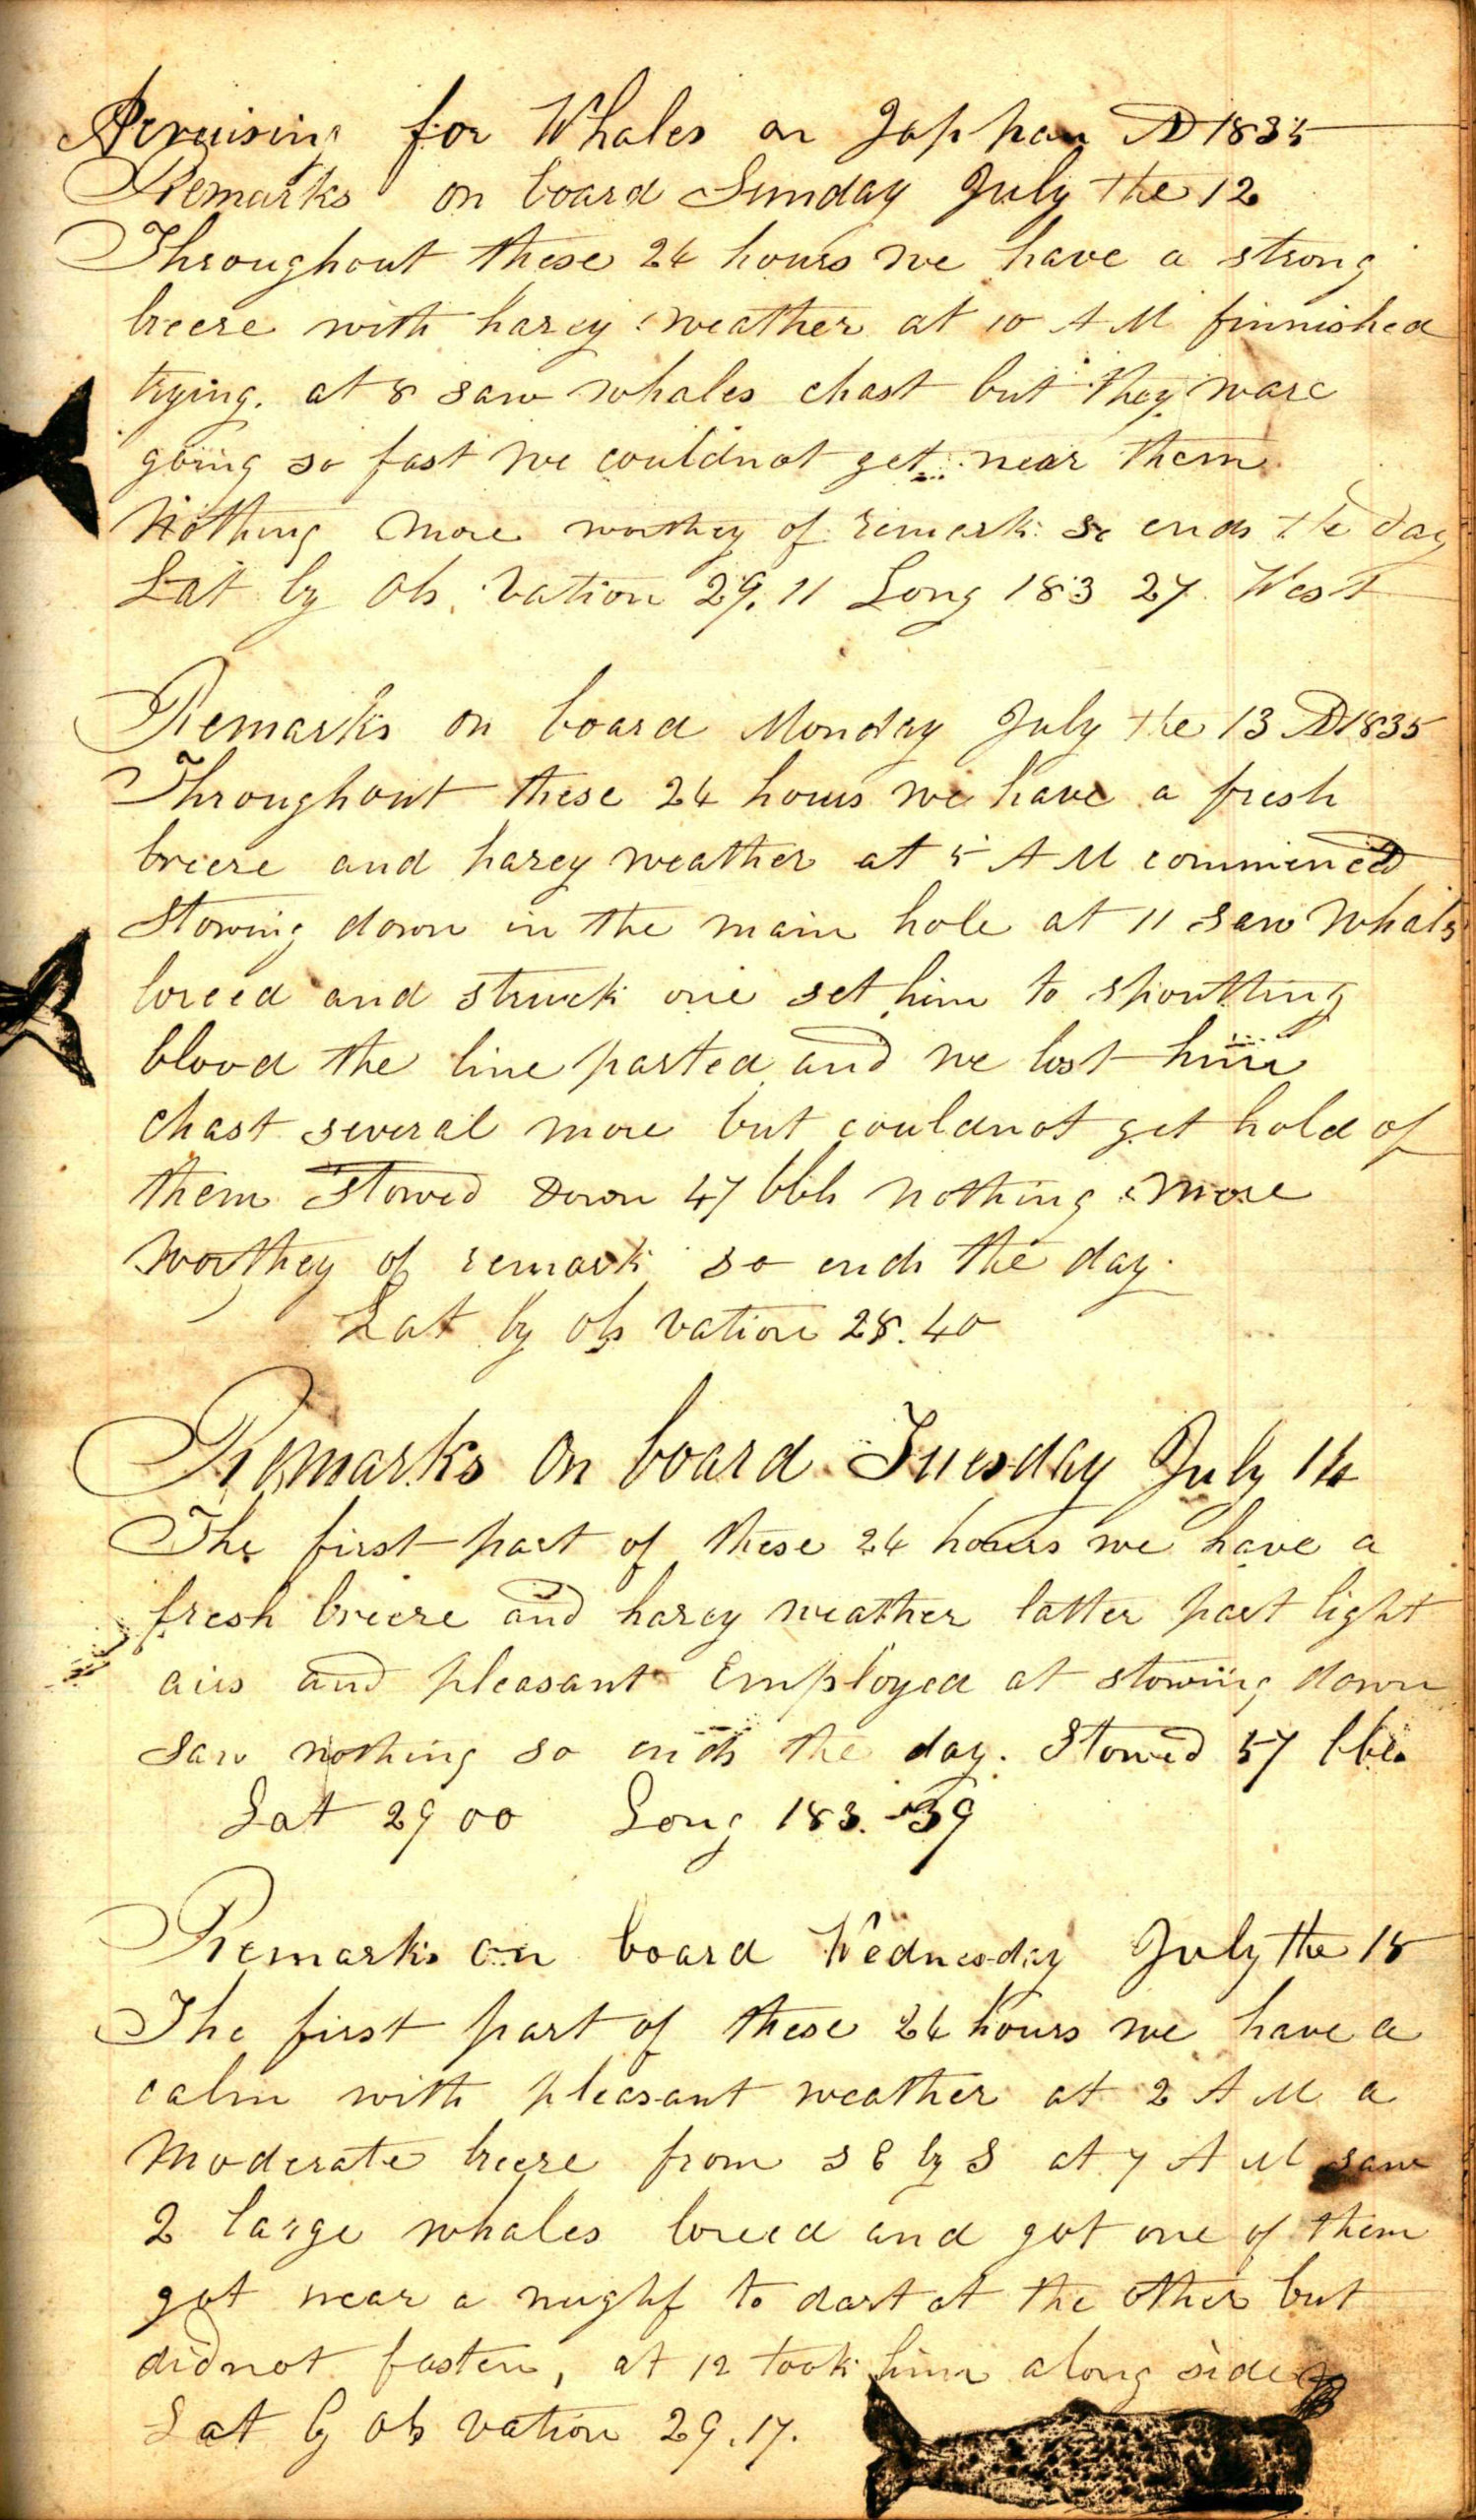 A page from the whaling log of the ship, Daniel Webster  on a voyage from Sag Harbor to the Pacific, 20 August 1833 - 12 May 1837 (dates contained in this journal are 27 August 1833 - 19 September 1833); owned by E. Mulford of Sag Harbor, commanded by Captain Philetus Pierson.  COURTESY OF THE EAST HAMPTON LIBRARY, LONG ISLAND COLLECTION